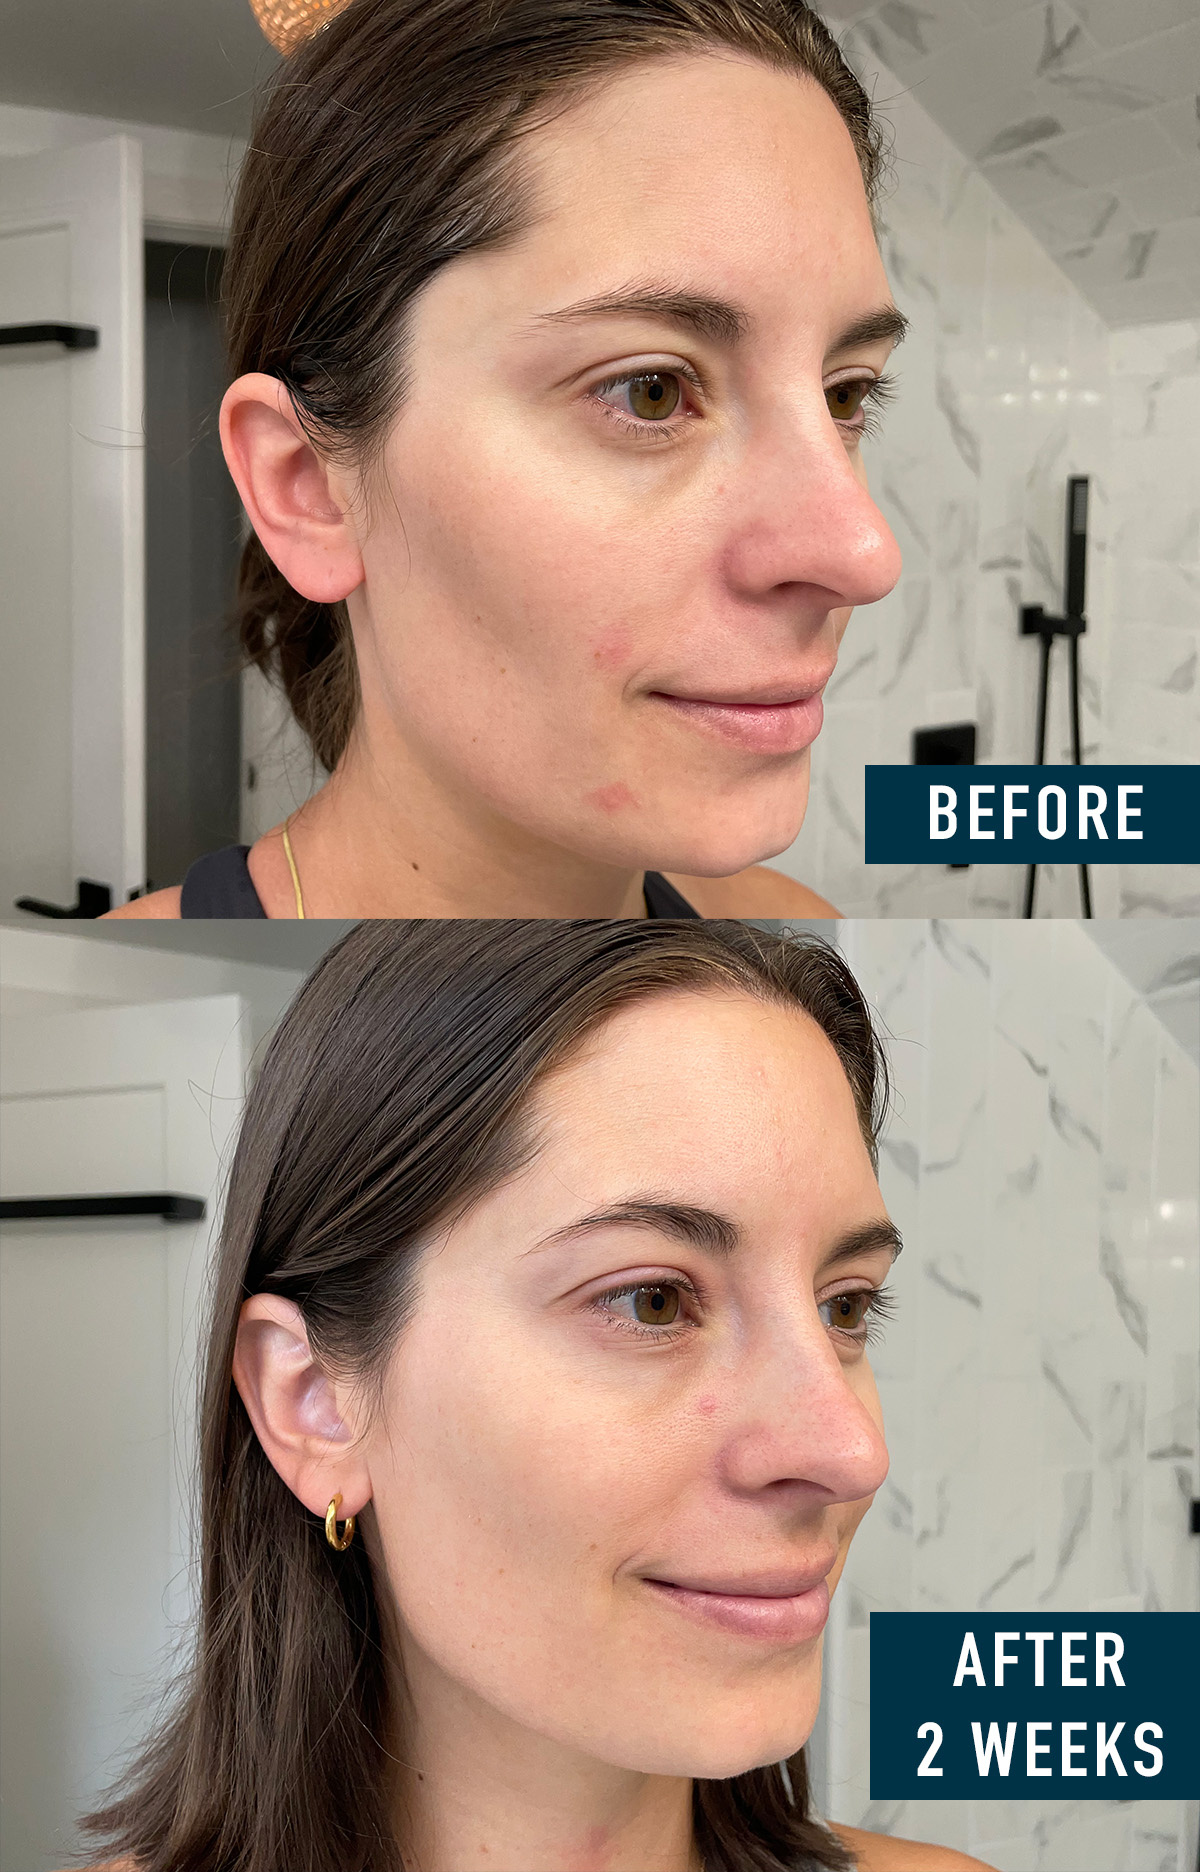 Olay Super Serum results showing why it is one of the top best beauty products of 2023.